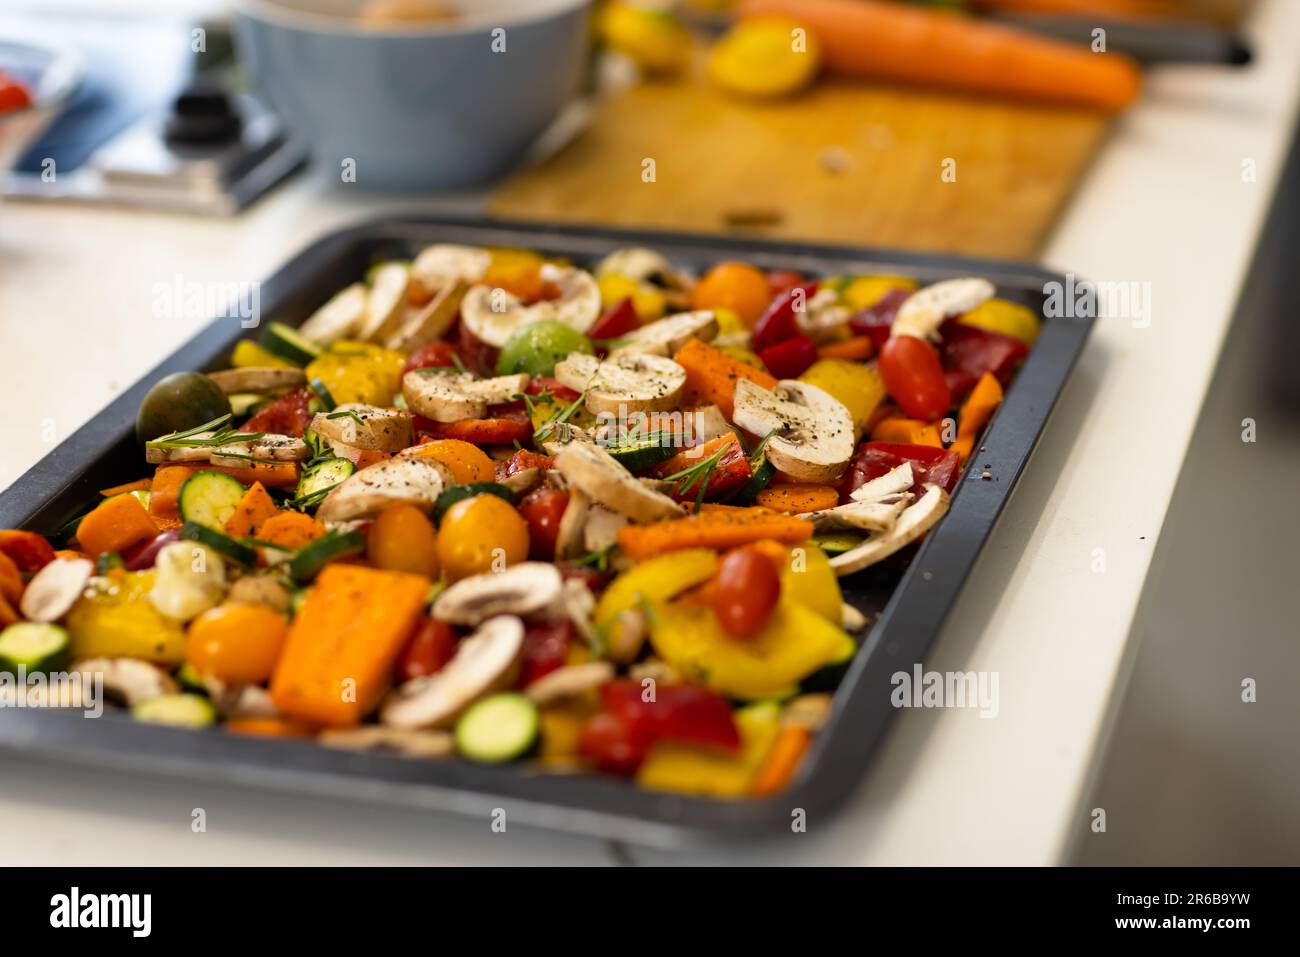 Seasoned chopped vegetables in baking tray on kitchen countertop Stock Photo